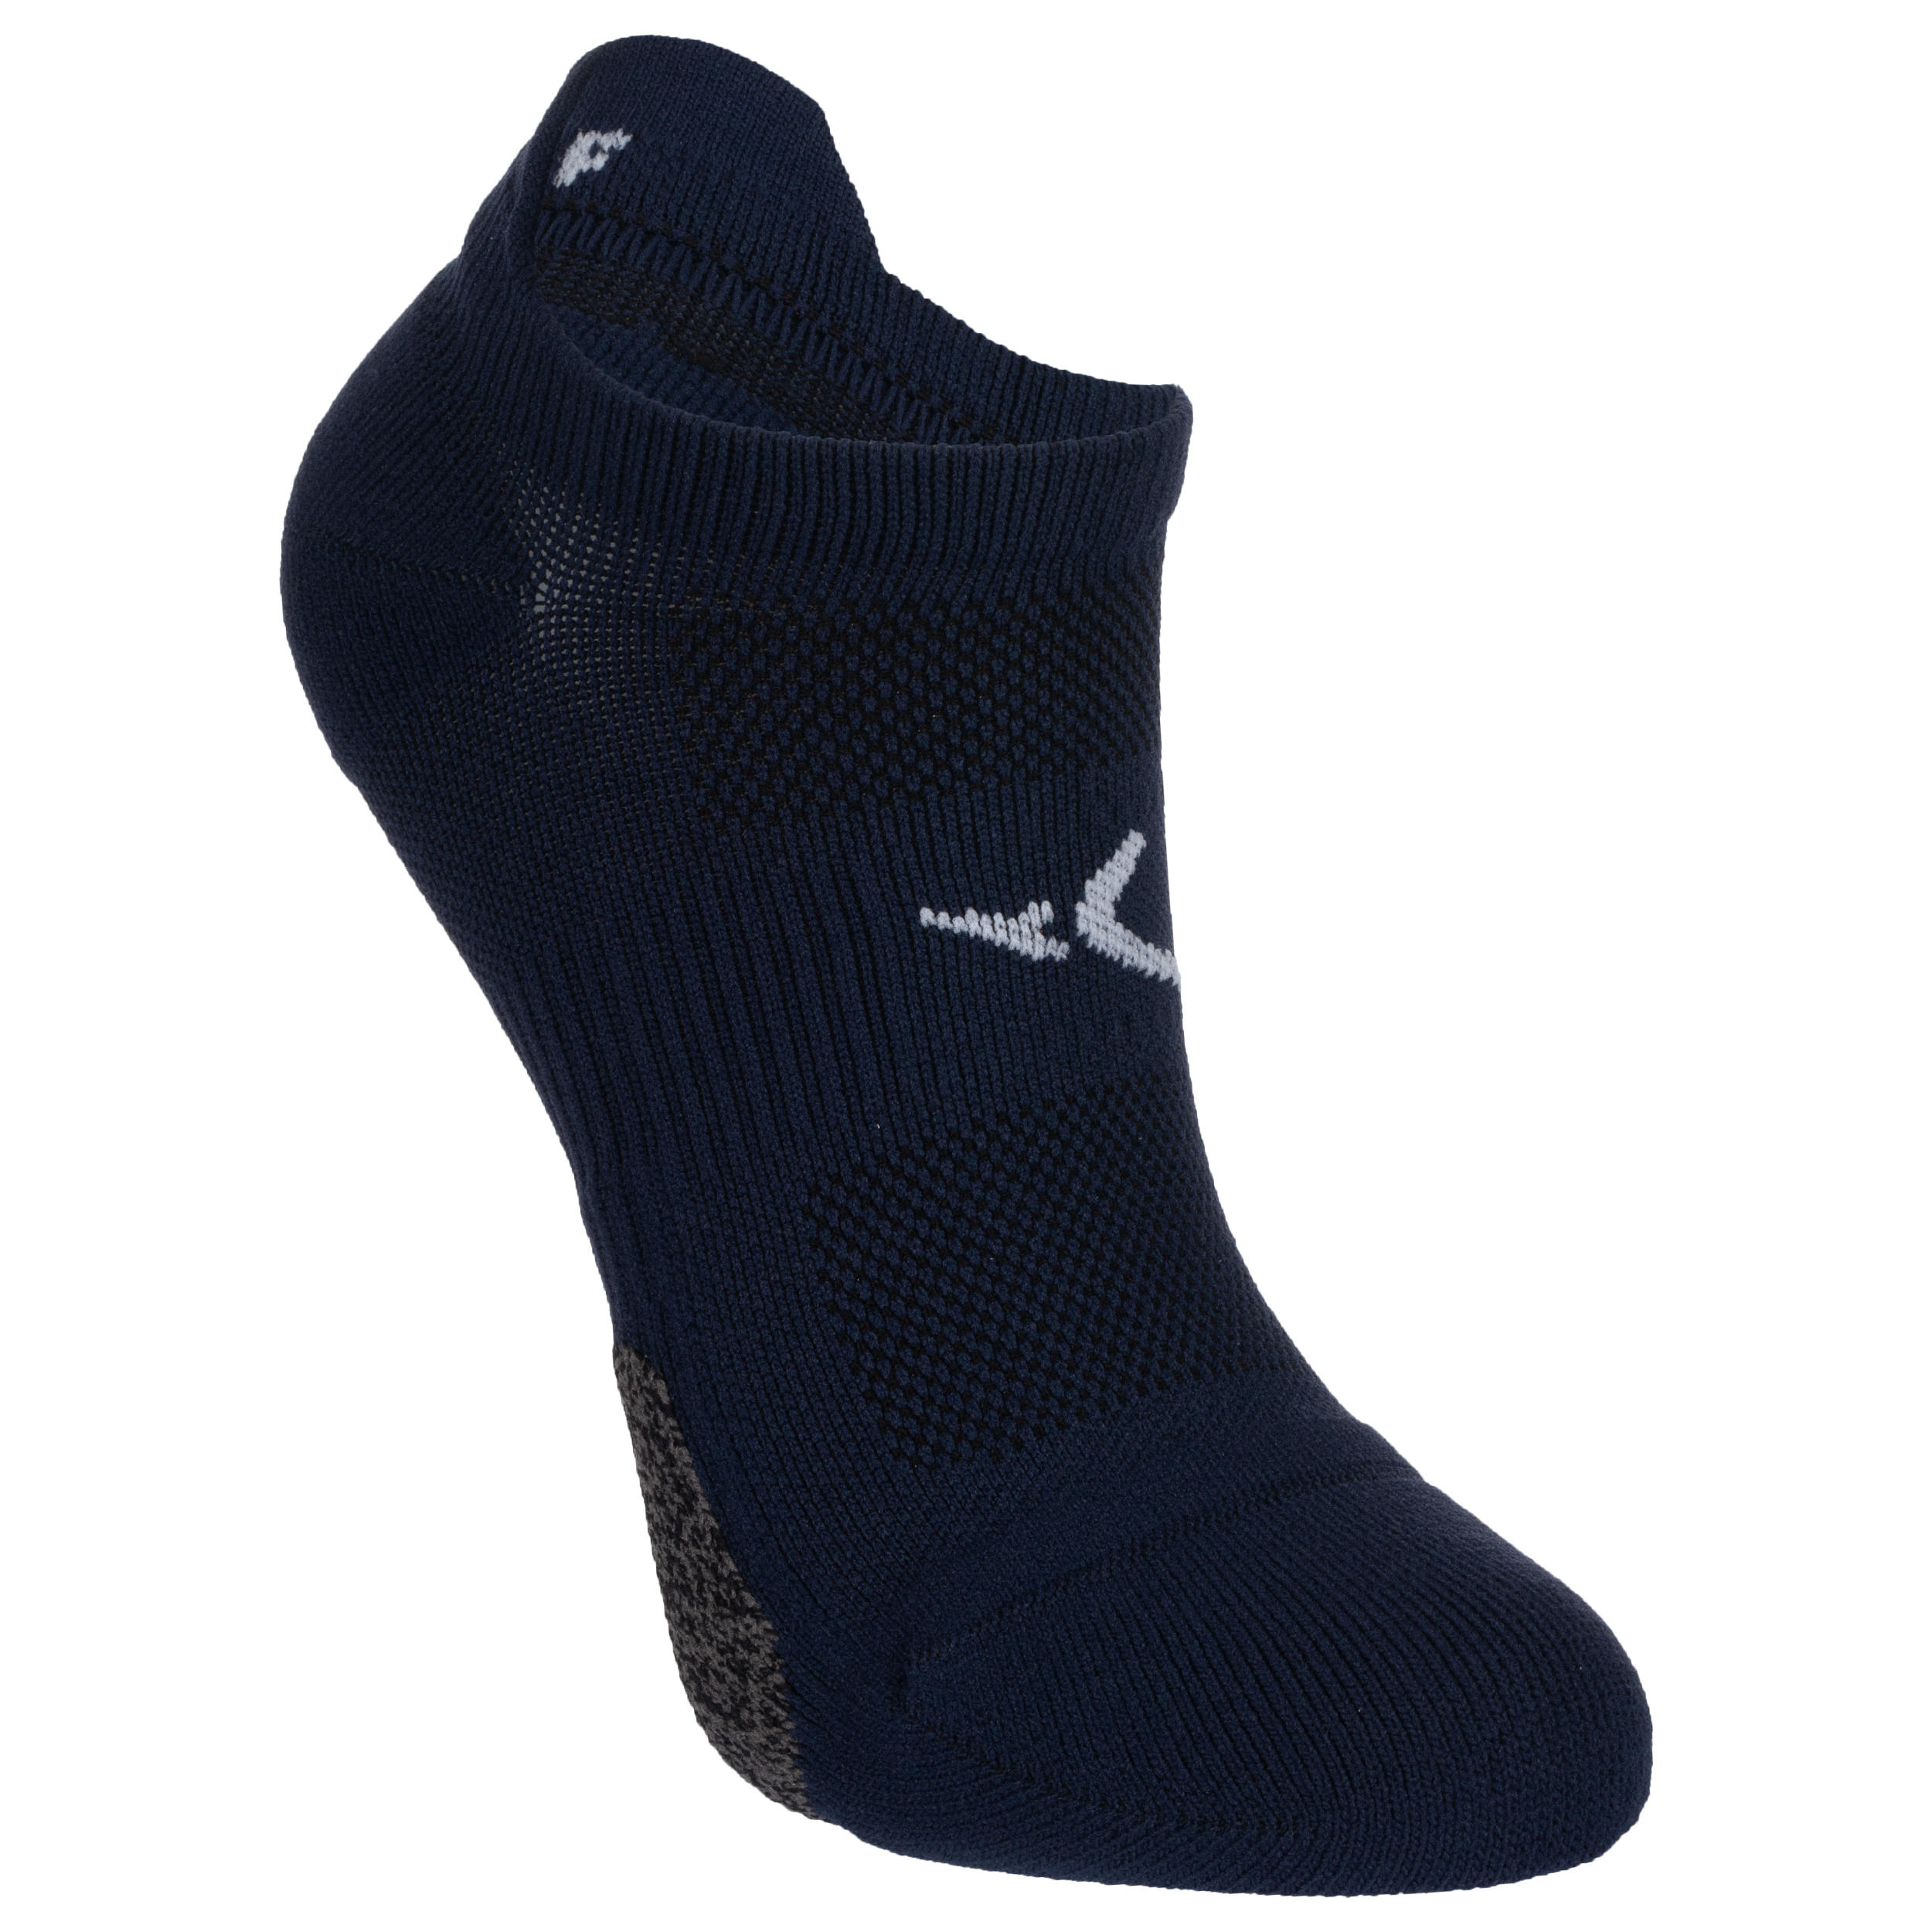 DOMYOS Invisible Fitness Cardio Training Socks Twin-Pack - Blue